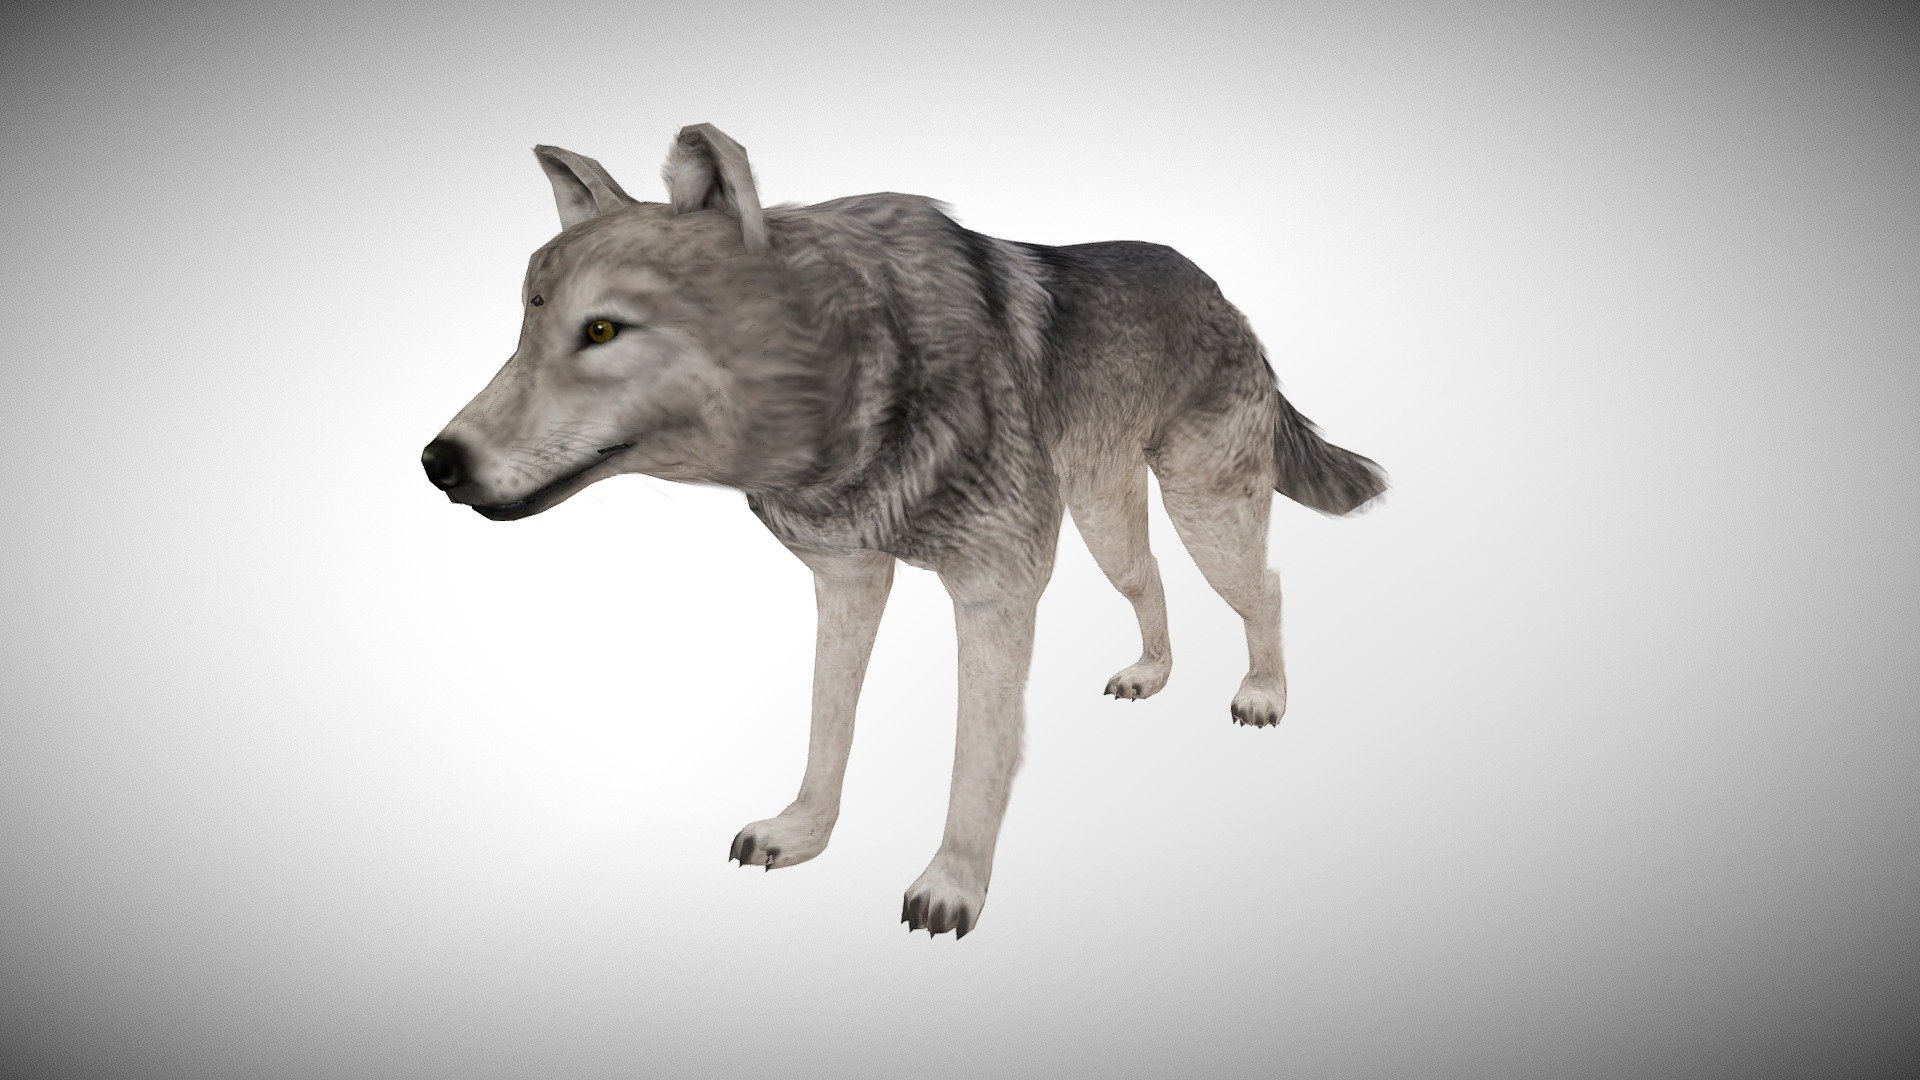 WATCH = https://youtu.be/8Ty82FwiHe4

3D REALISTIC WOLF WITH ANIMATIONS

PACKAGE INCLUDE


High quality model, correctly scaled for an accurate representation of the original object.
High Detailed Photorealistic Wolf, completely UVmapped and smoothable.
Model is built to real-world scale.
Many different format like blender, fbx, obj, iclone, dae
White &amp; Black two color version of texture
No additional plugin is needed to open the model.
3d print ready in different poses
Separate Loopable Animations
Ready for animation
High Quality materials and textures
Triangles = 4124
Vertices = 2337
Edges = 6467
Faces = 4124

ANIMATIONS


Idle
Walk
Walk Fast
Run
Eat
Howl
+Many different 3d Print Poses
 - WOLF ANIMATED - Buy Royalty Free 3D model by Bilal Creation Production (@bilalcreation) 3d model